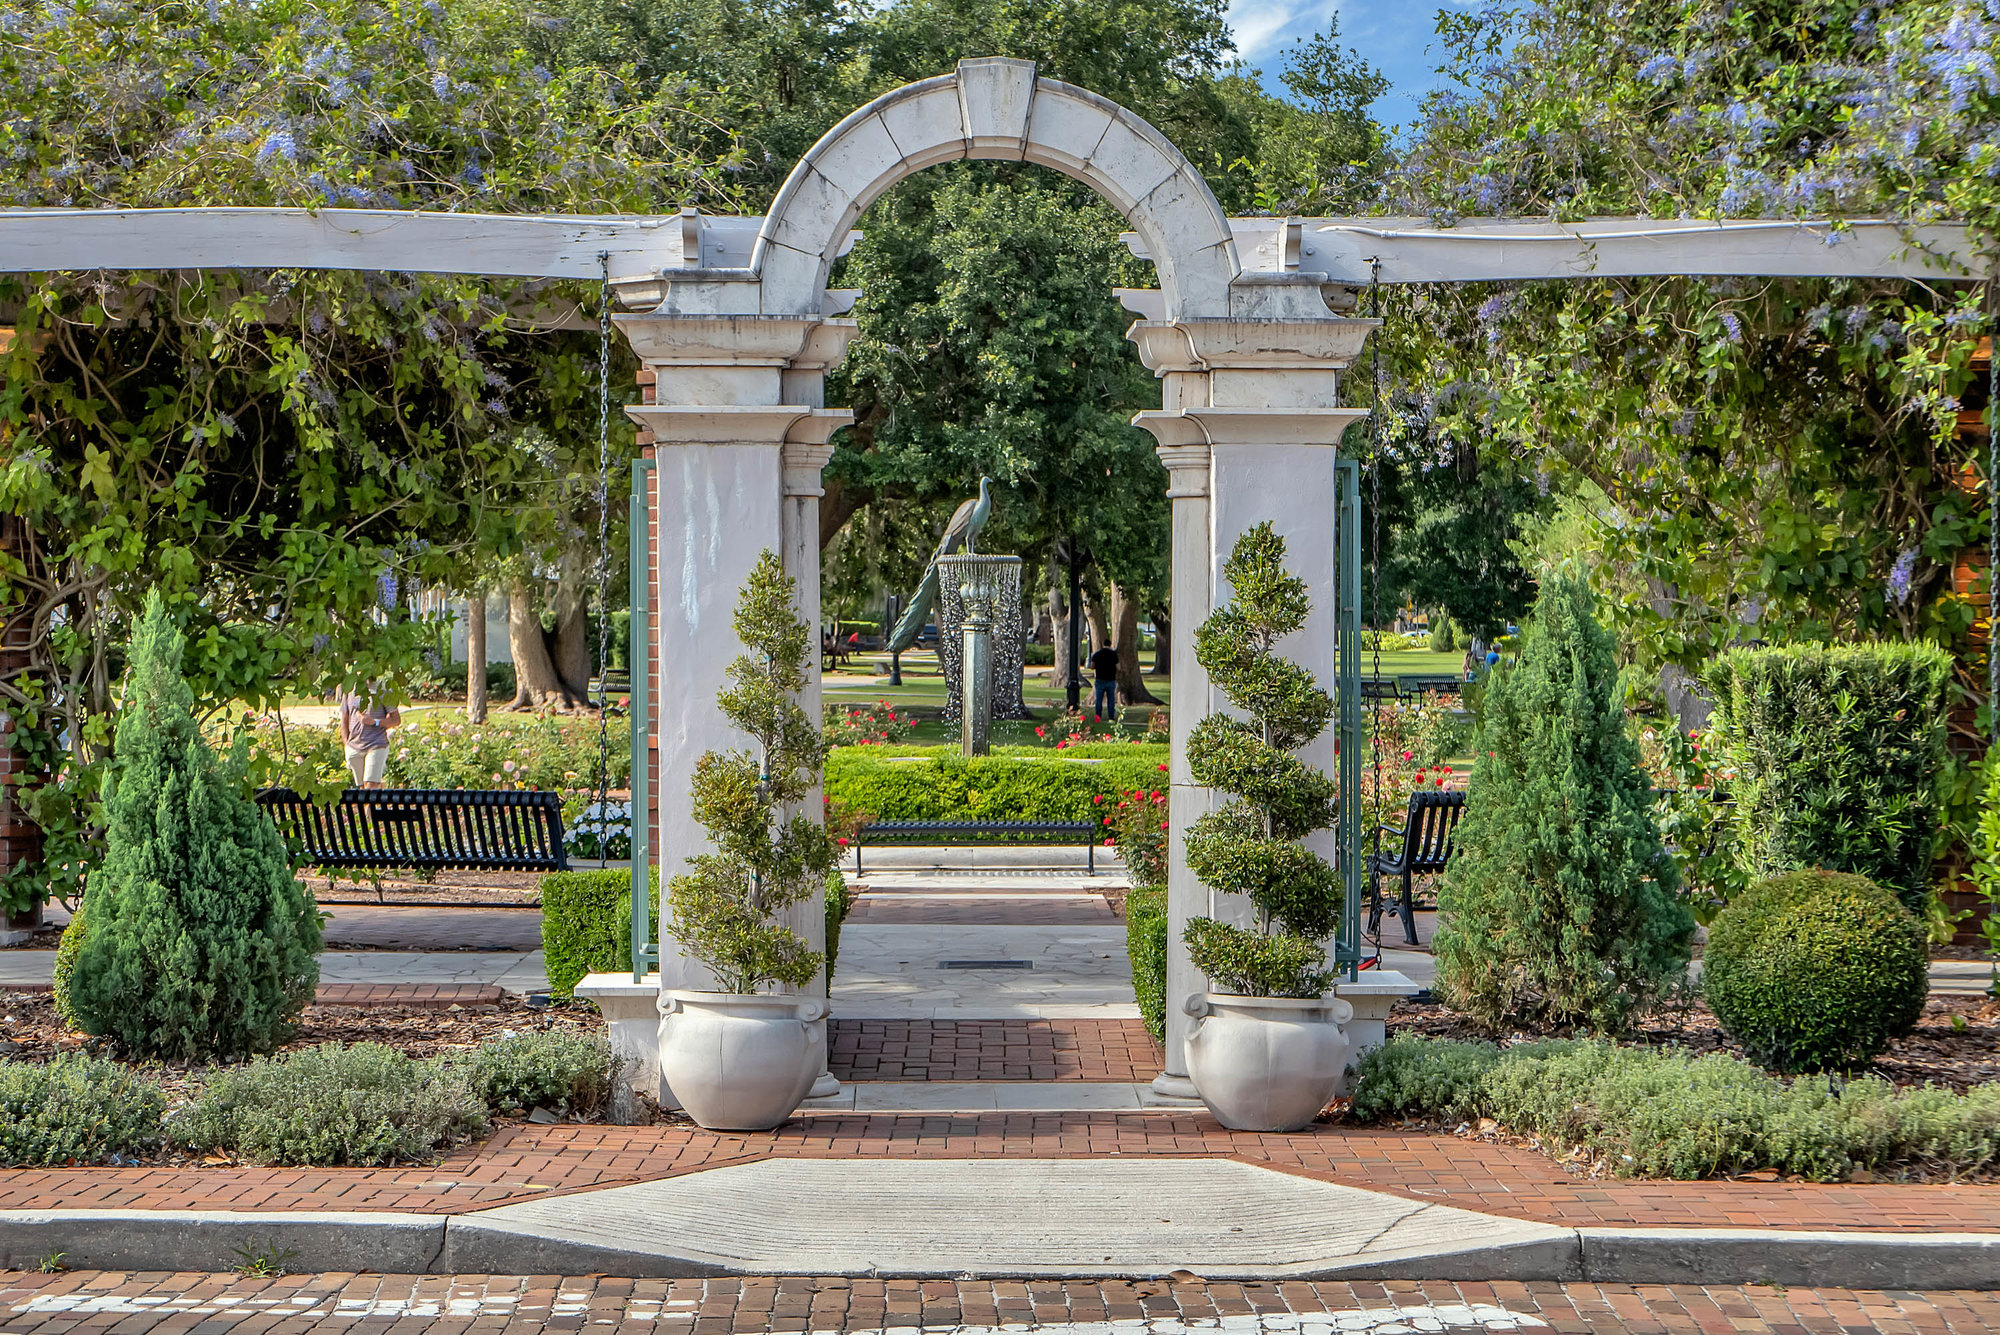 garden archway with winter park peacock at fountain